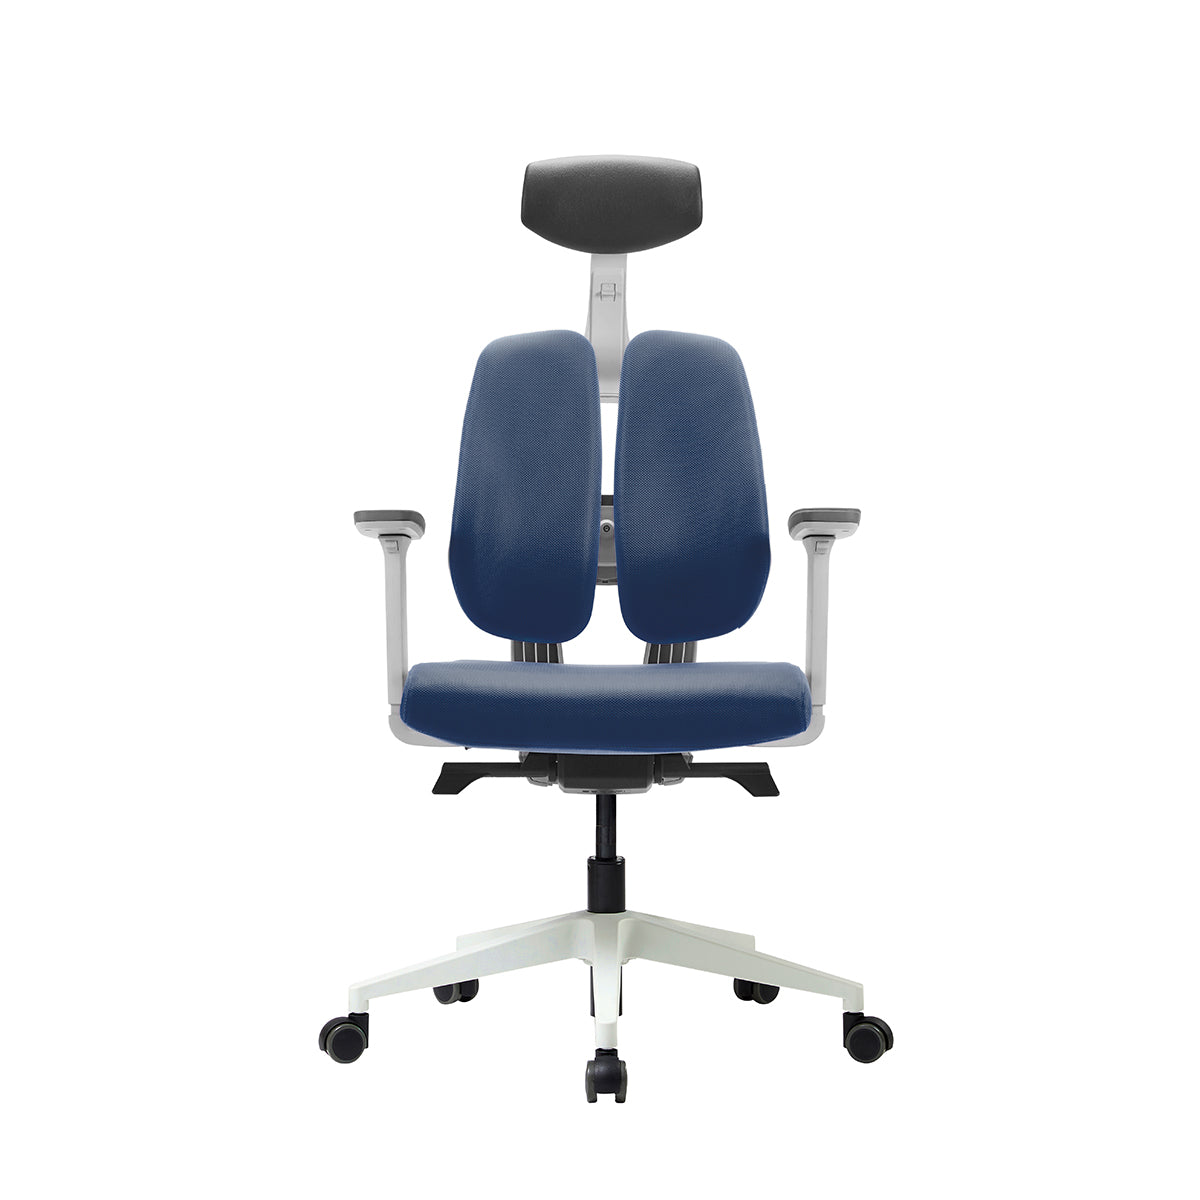 DUOREST DUOTEX Collection Office Home Award Winning Ergonomic Chair, White Frame - D2-200W-TS138